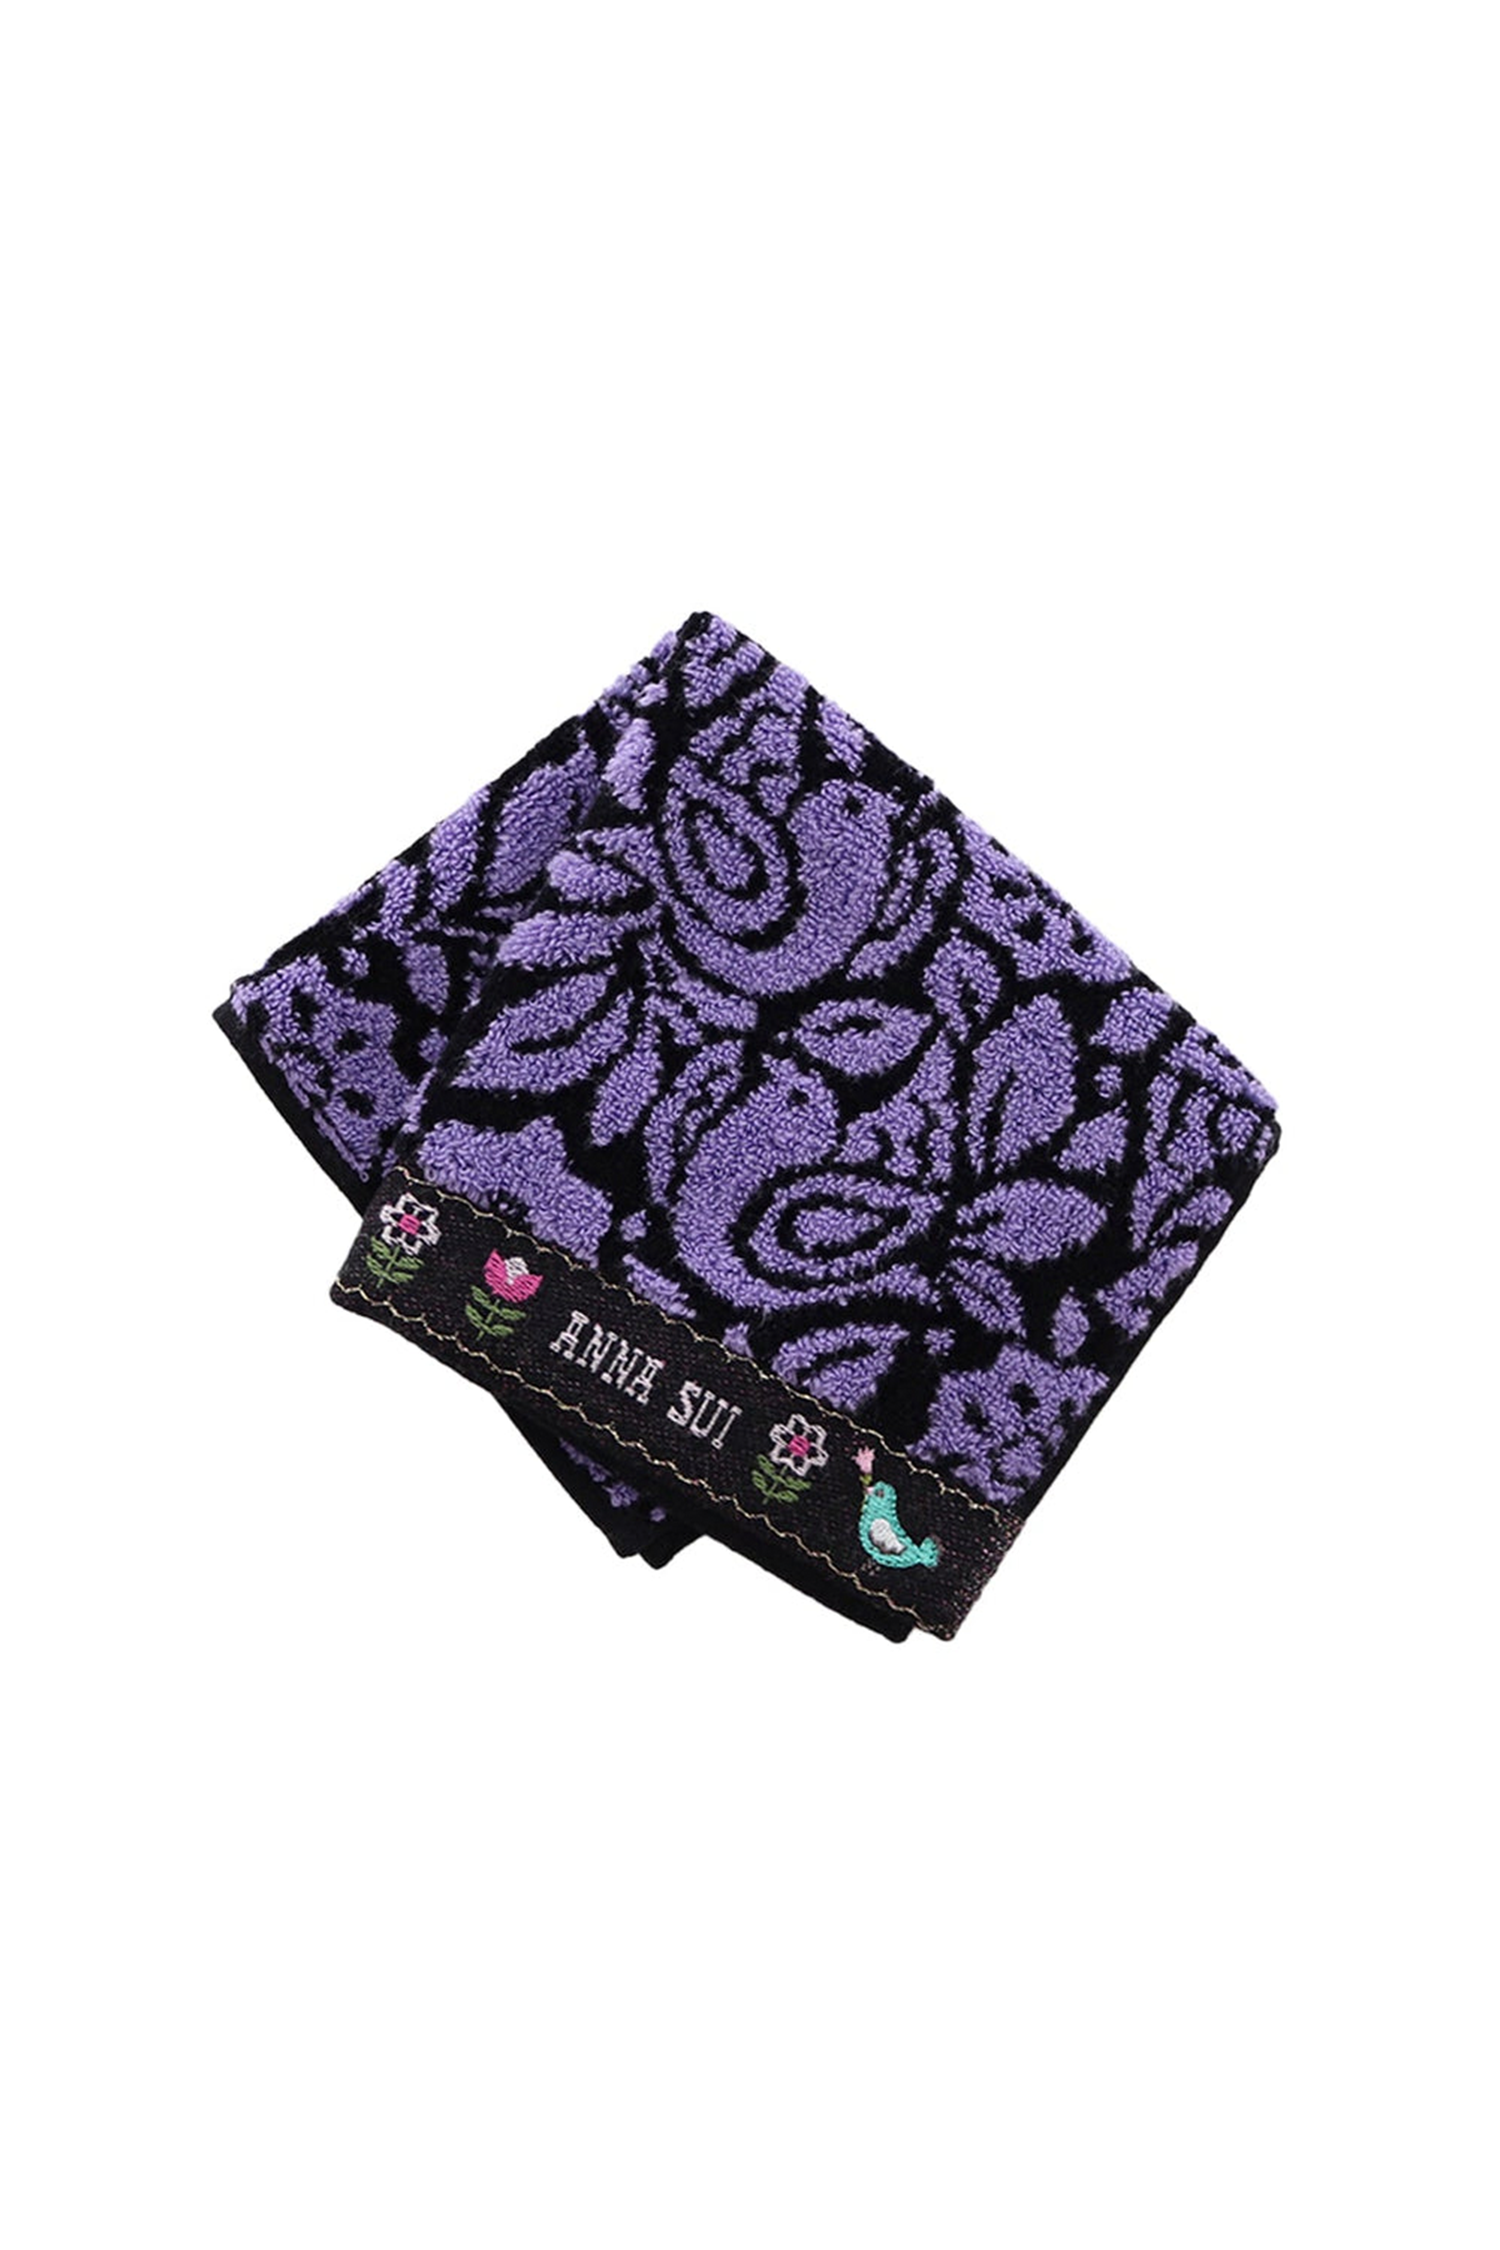 Birds of Paradise Washcloth, black border bottom with Anna Sui label, a blue bird, line of flowers